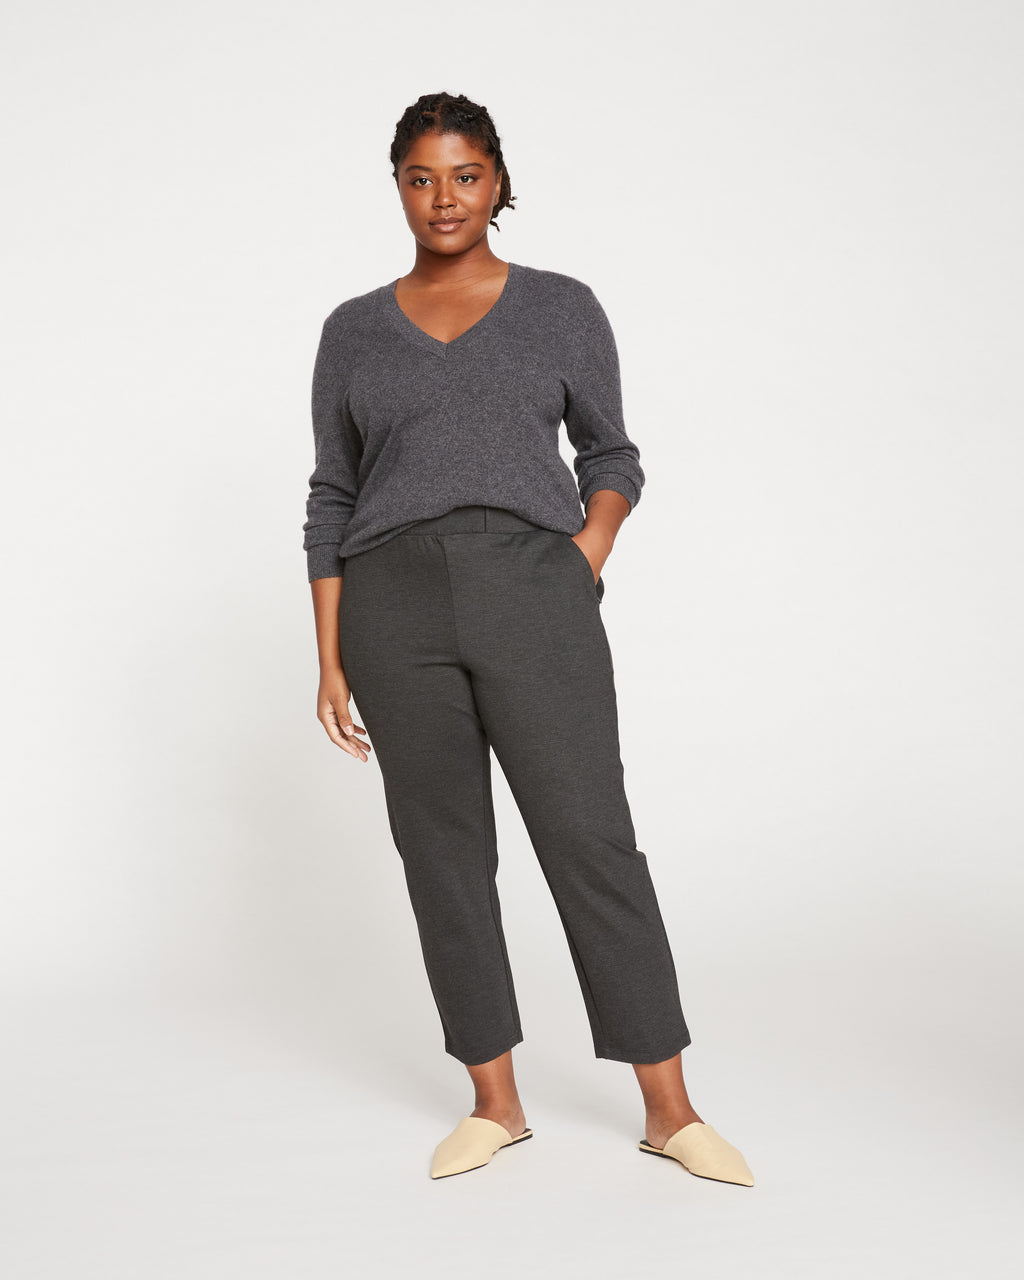 Pull On Bootcut Ponte Pants - Evening Forest